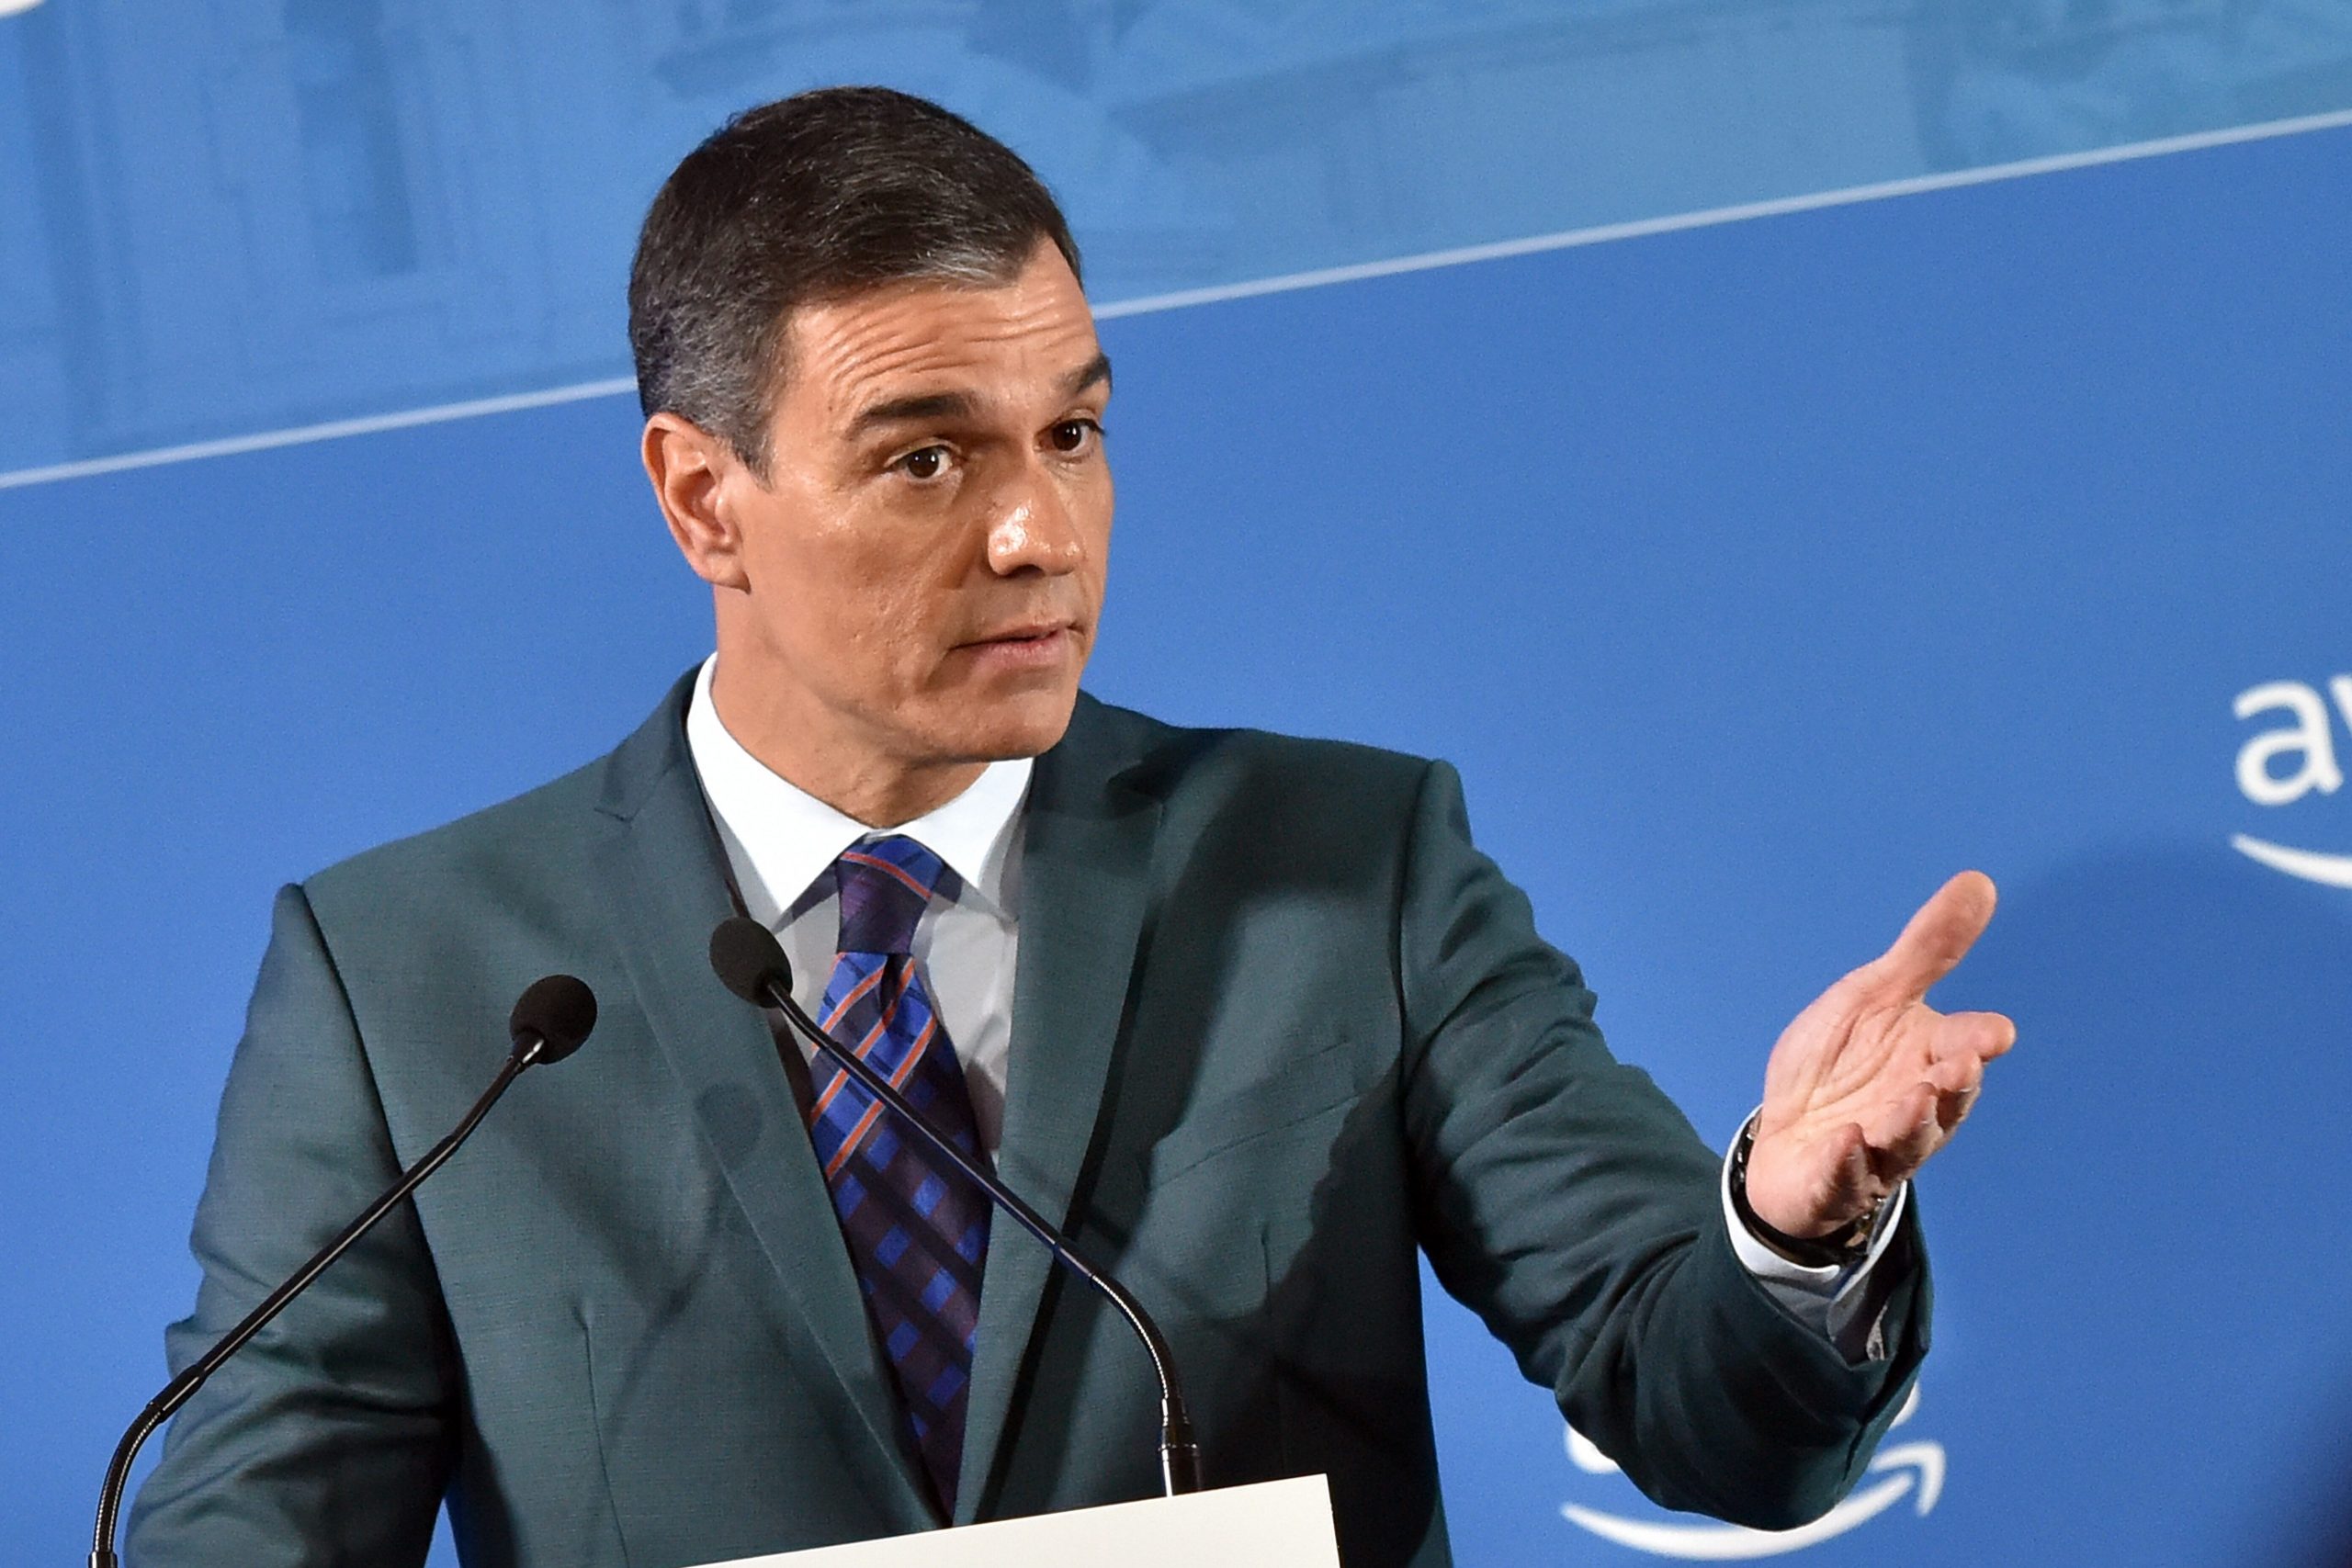 Pedro Sanchez says court veto over appointing judges is ‘unprecedented’ in Spain’s democratic history